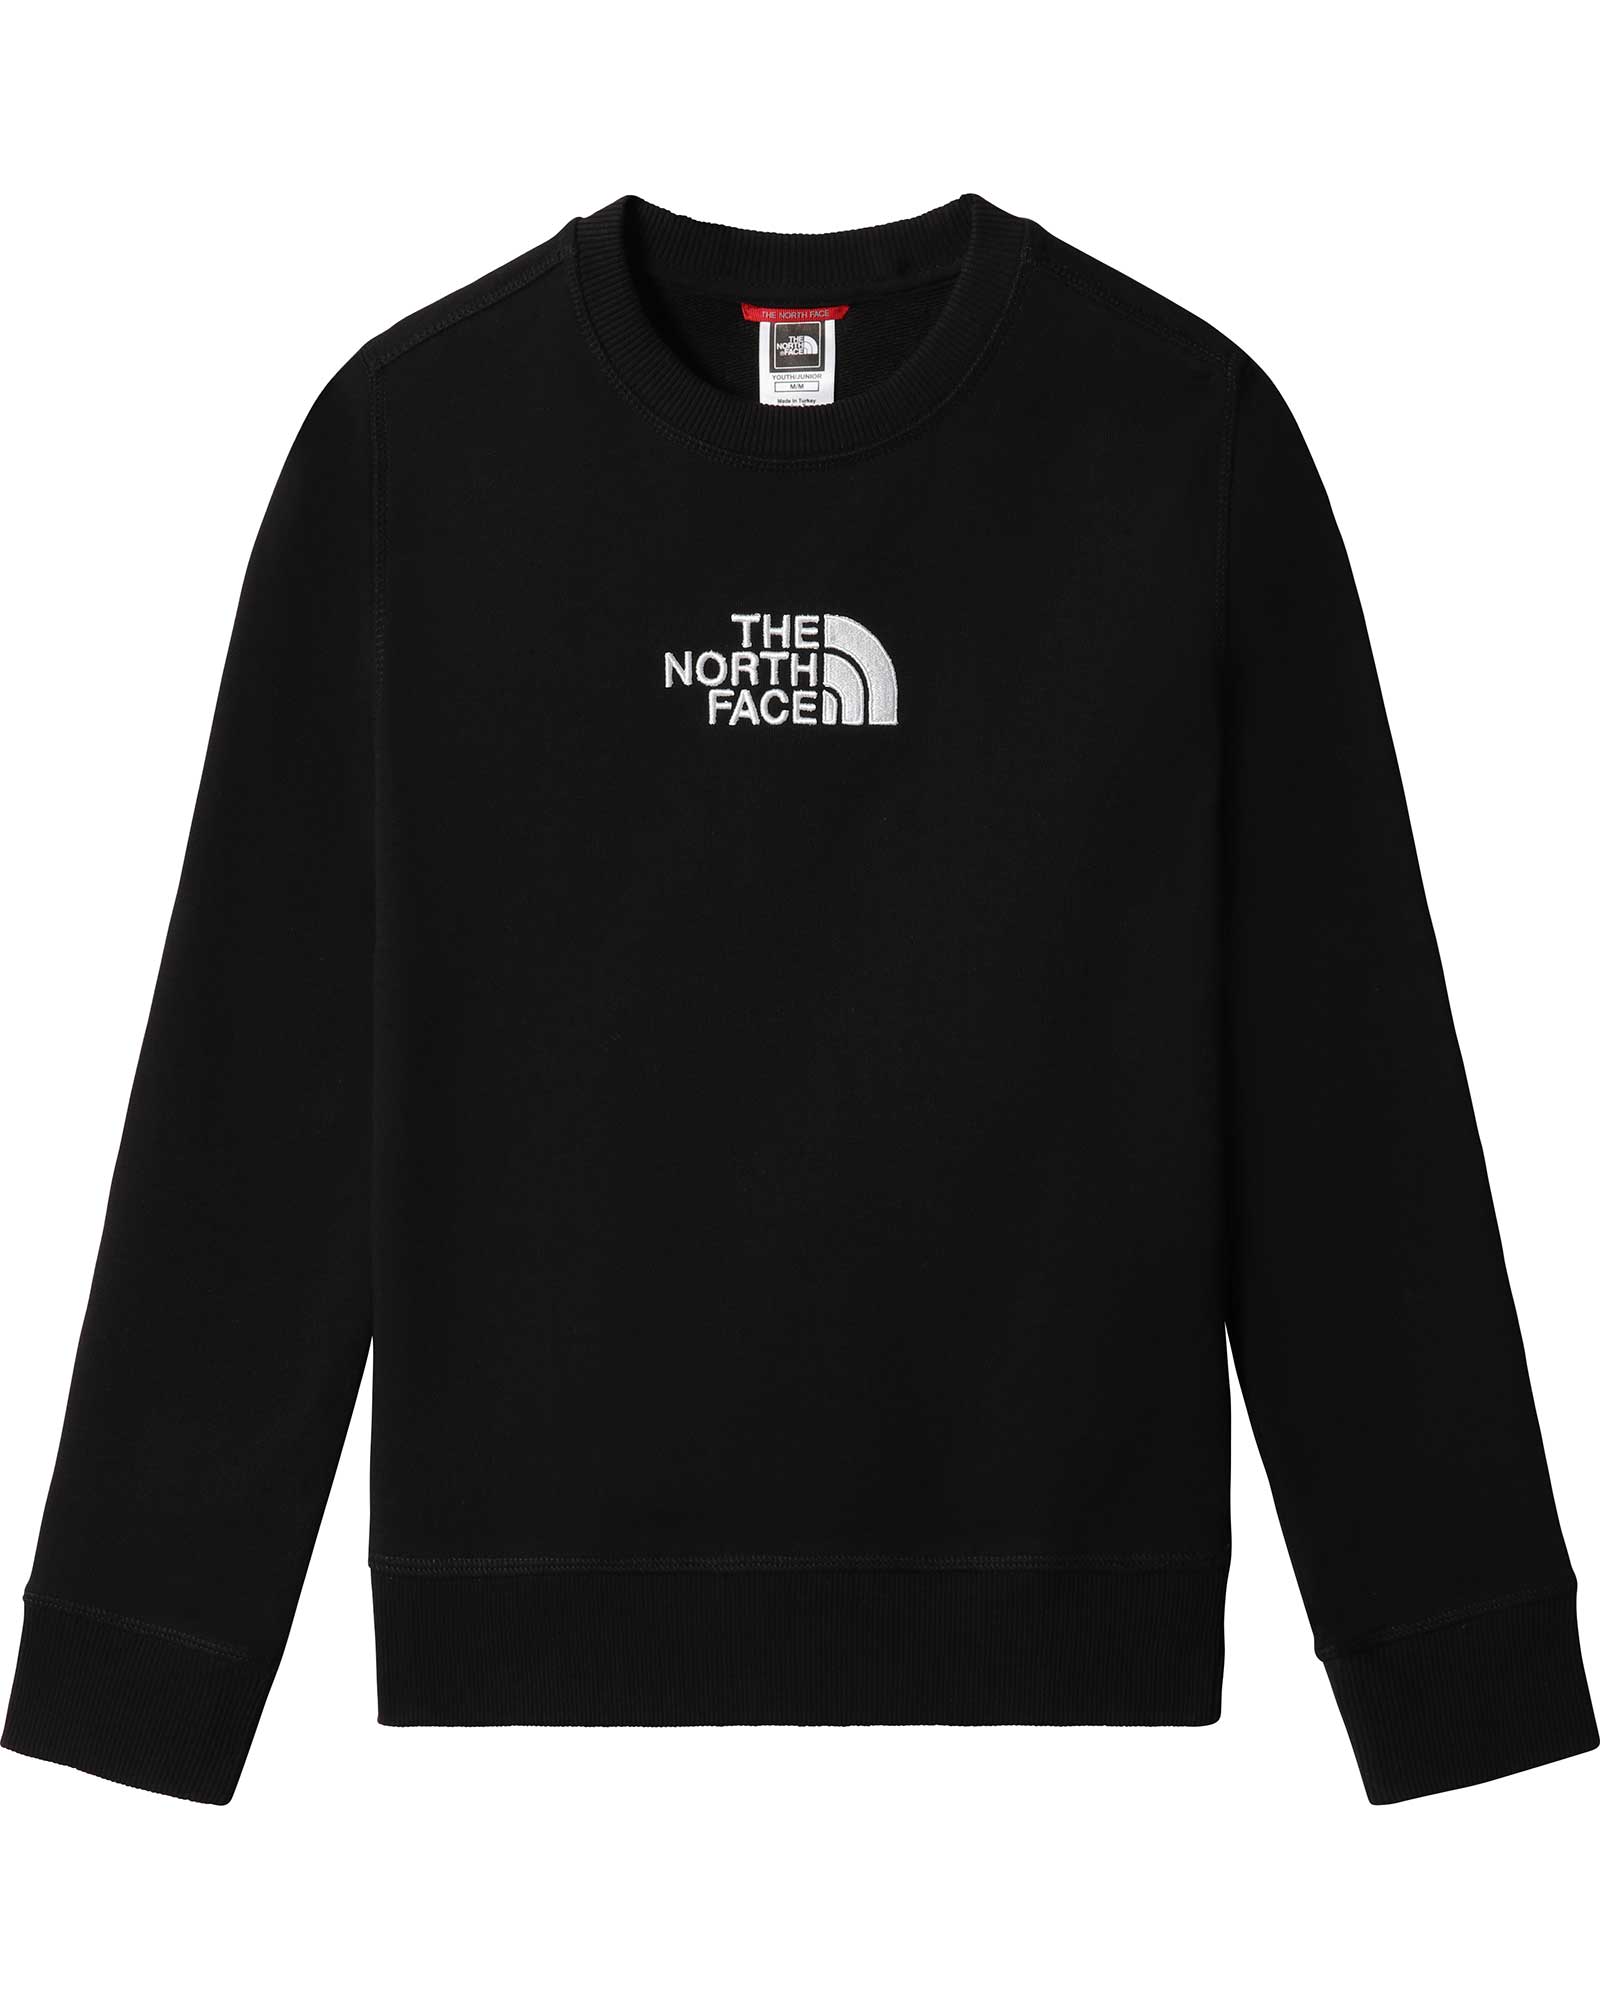 The North Face Youth Youth Drew Peak Kids’ Light Crew - TNF Black S